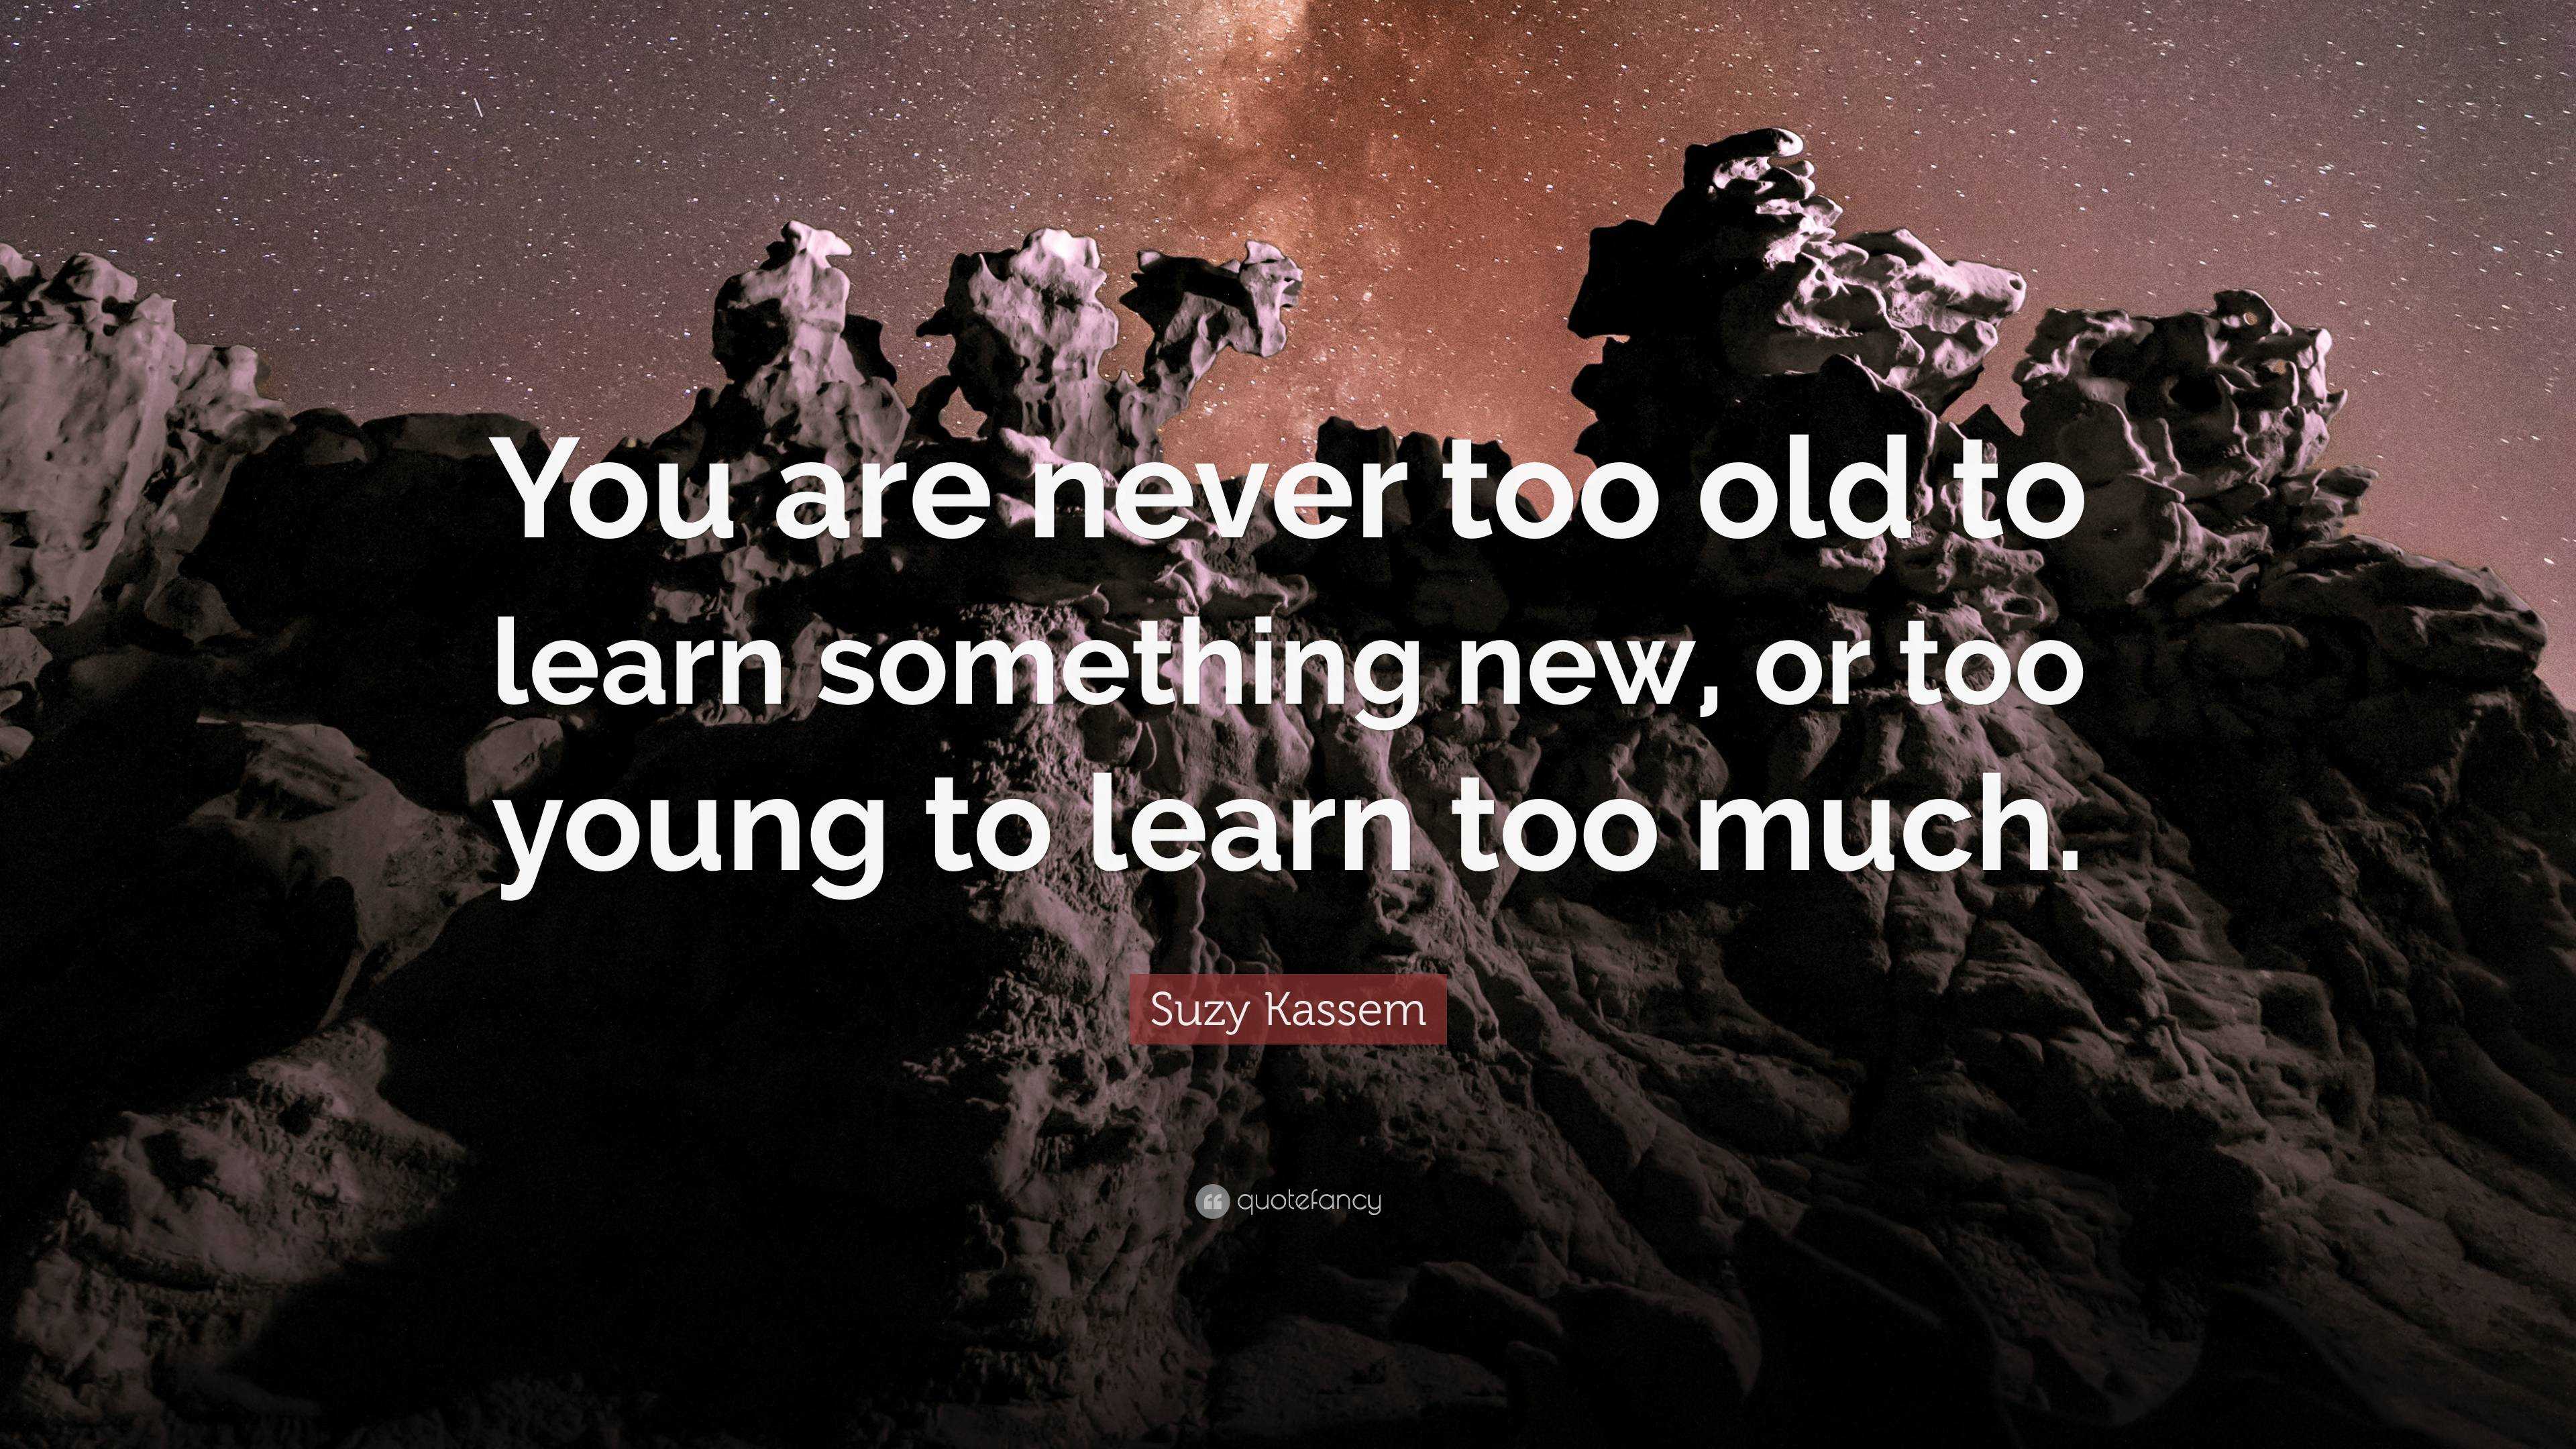 Suzy Kassem Quote “You are never too old to learn something new, or